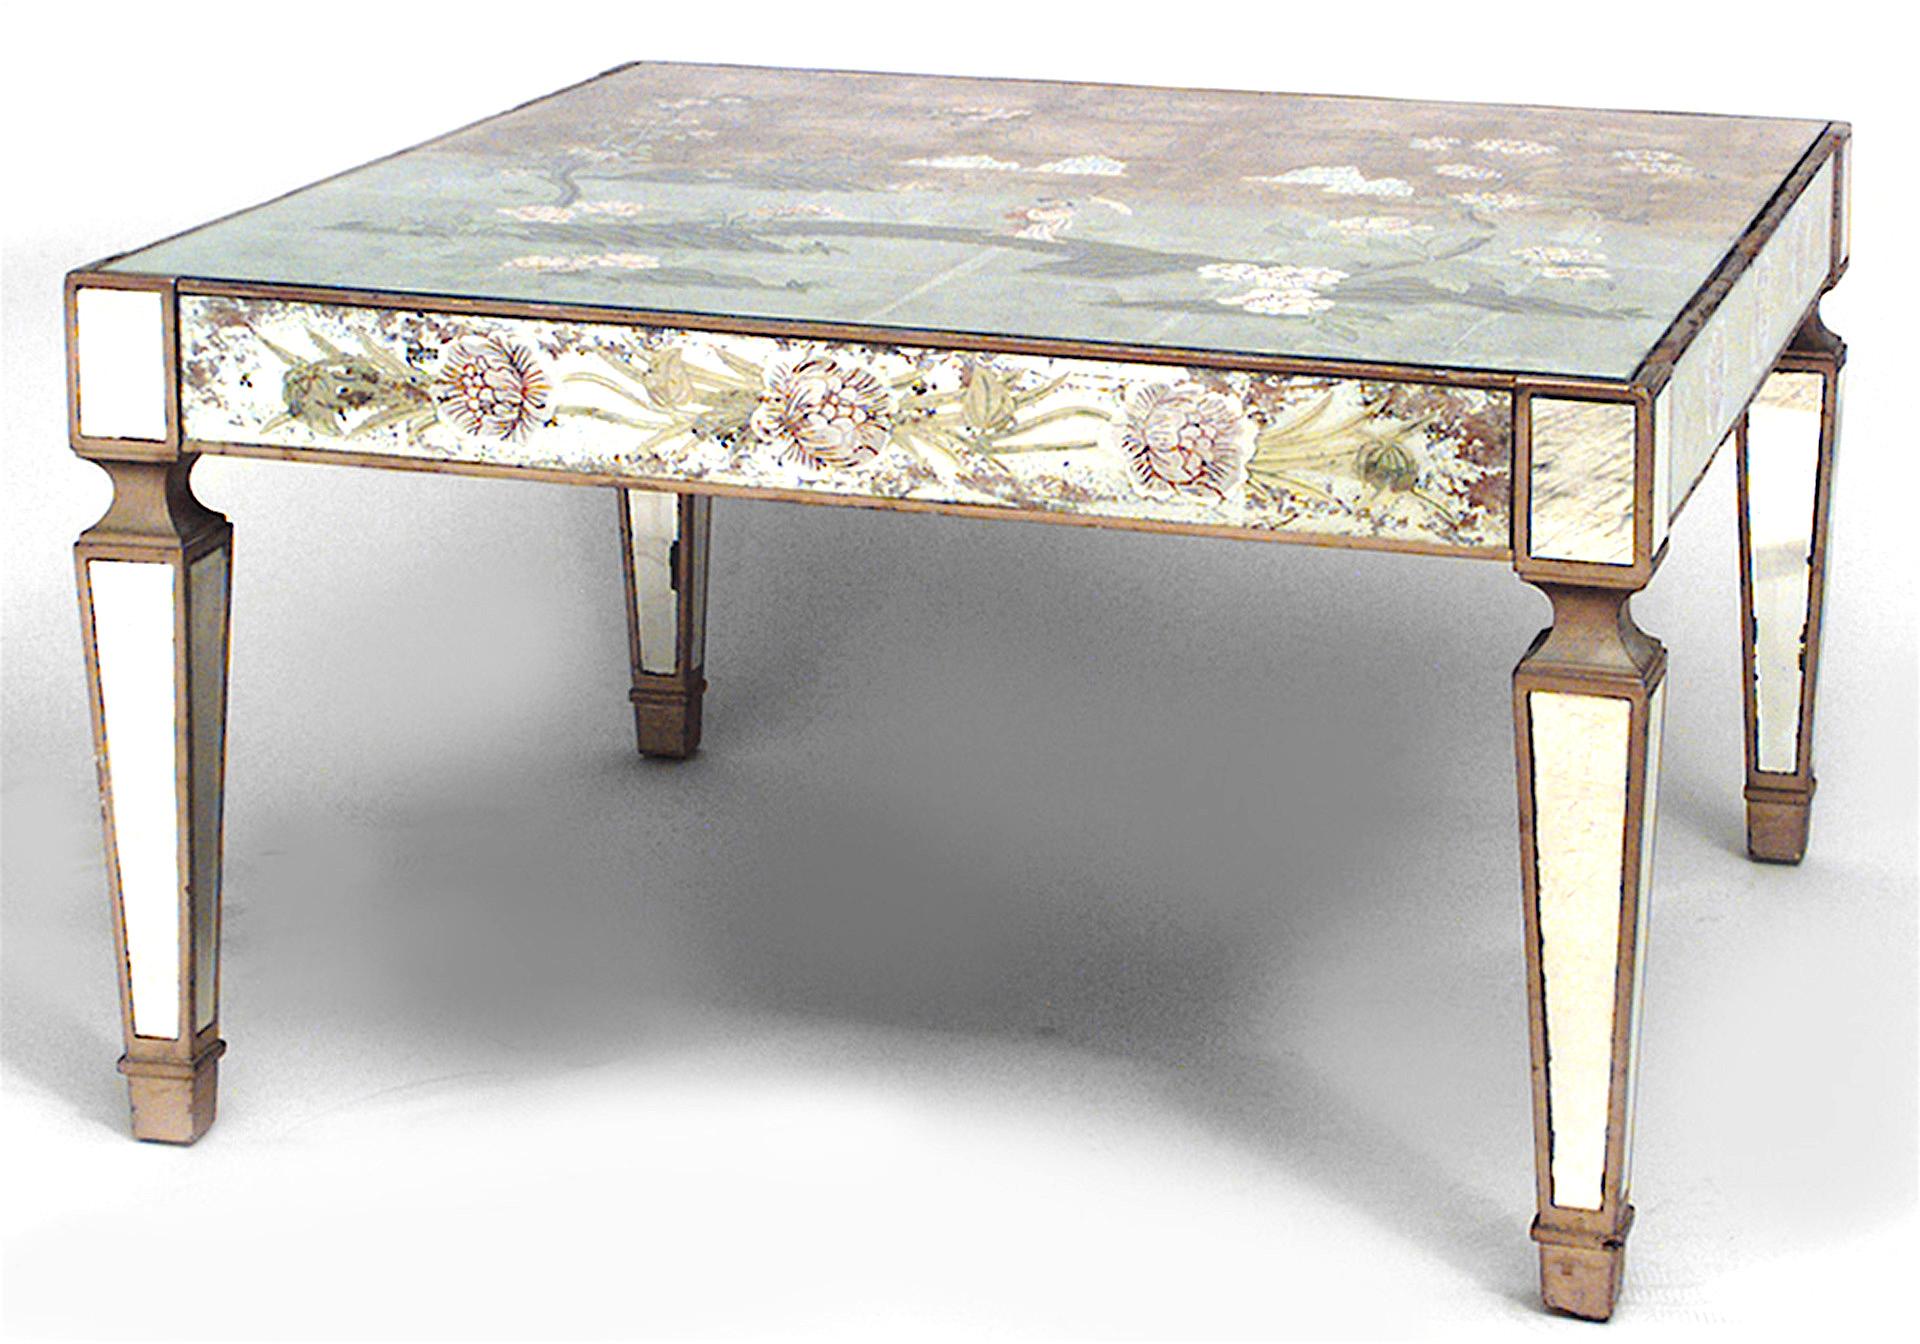 Italian (1940s) square coffee table with reverse painted mirrored top featuring Chinoiserie figures and floral decoration.
